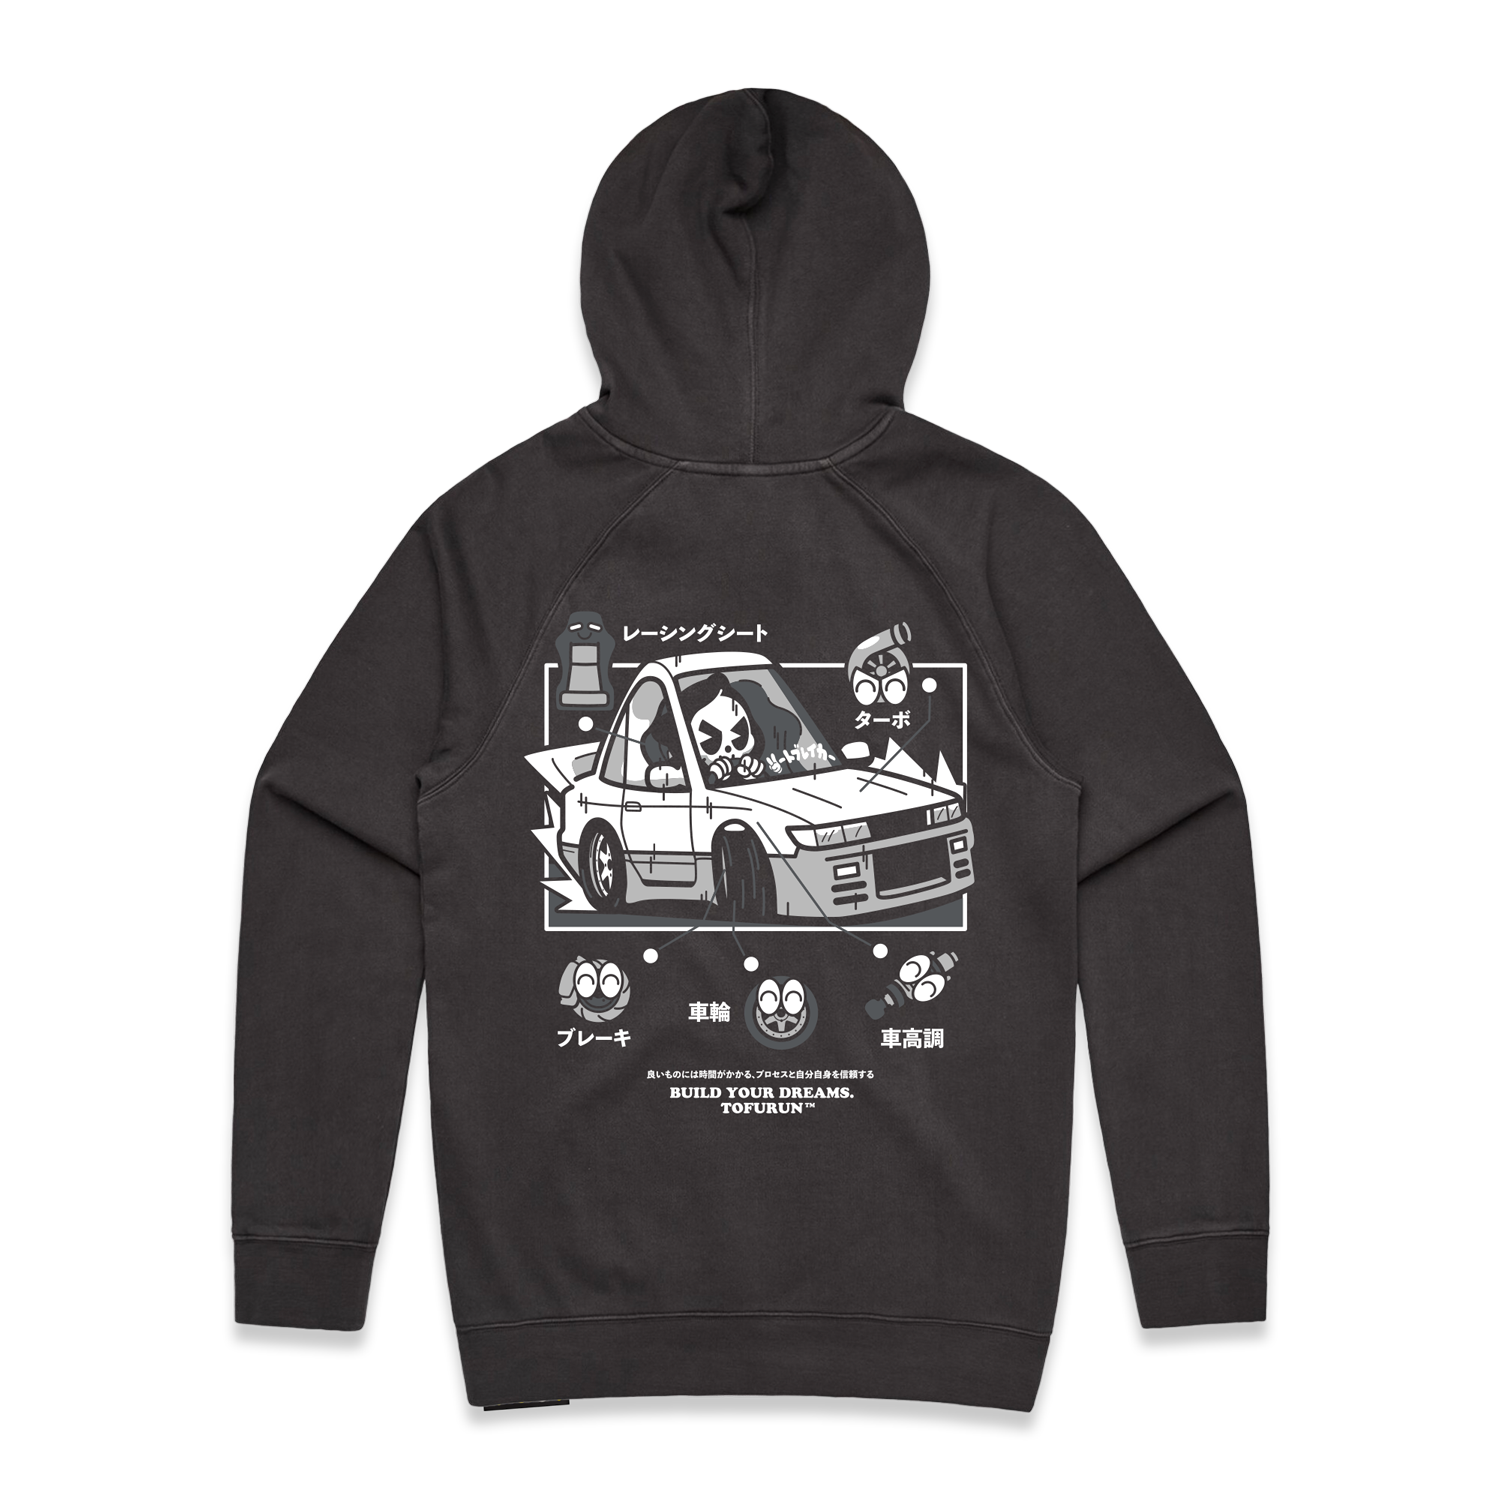 Build Your Dreams Faded Hoodie